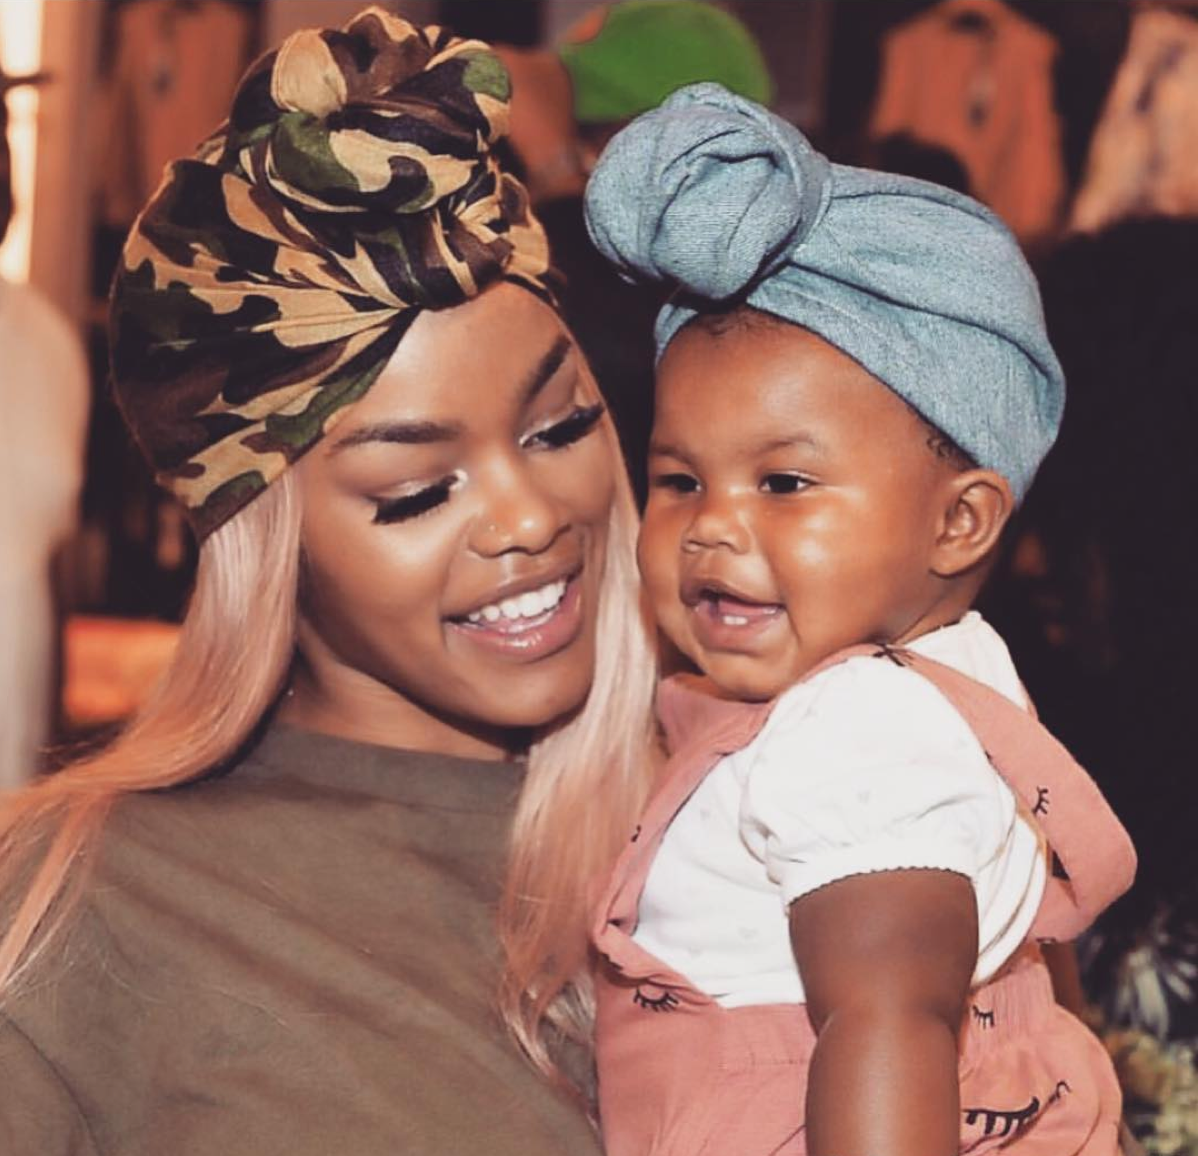 Teyana Taylor Shares A Touching Tribute For Her Daughter's First Birthday